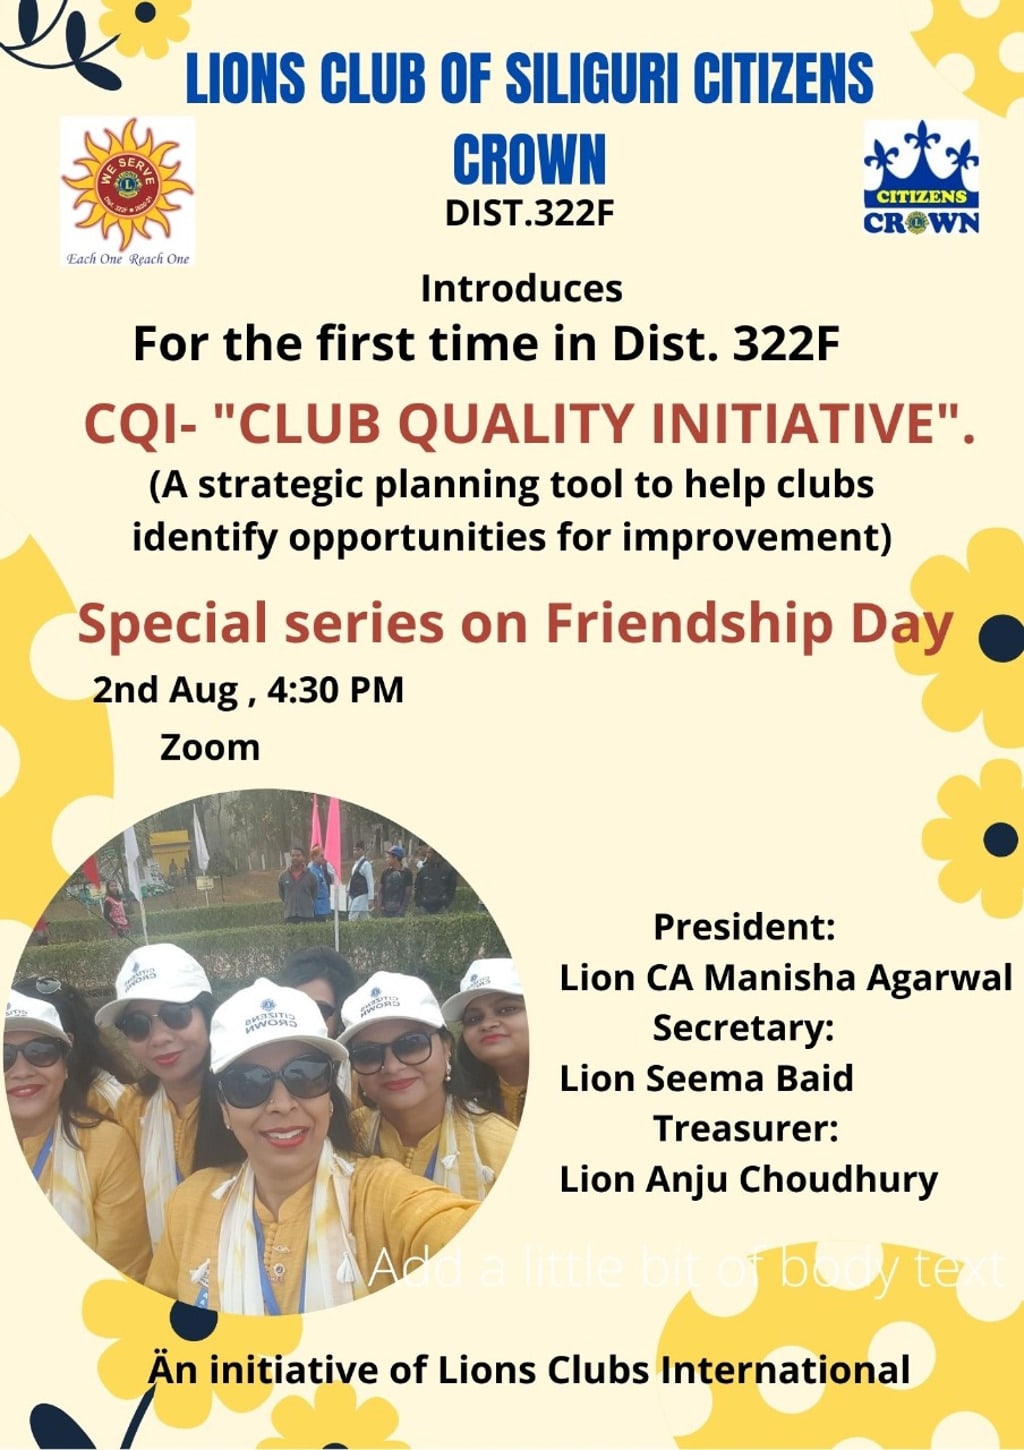 Lions322F implementation of Club Quality Initiative -CQI by Lions Club of Siliguri Citizens Crown